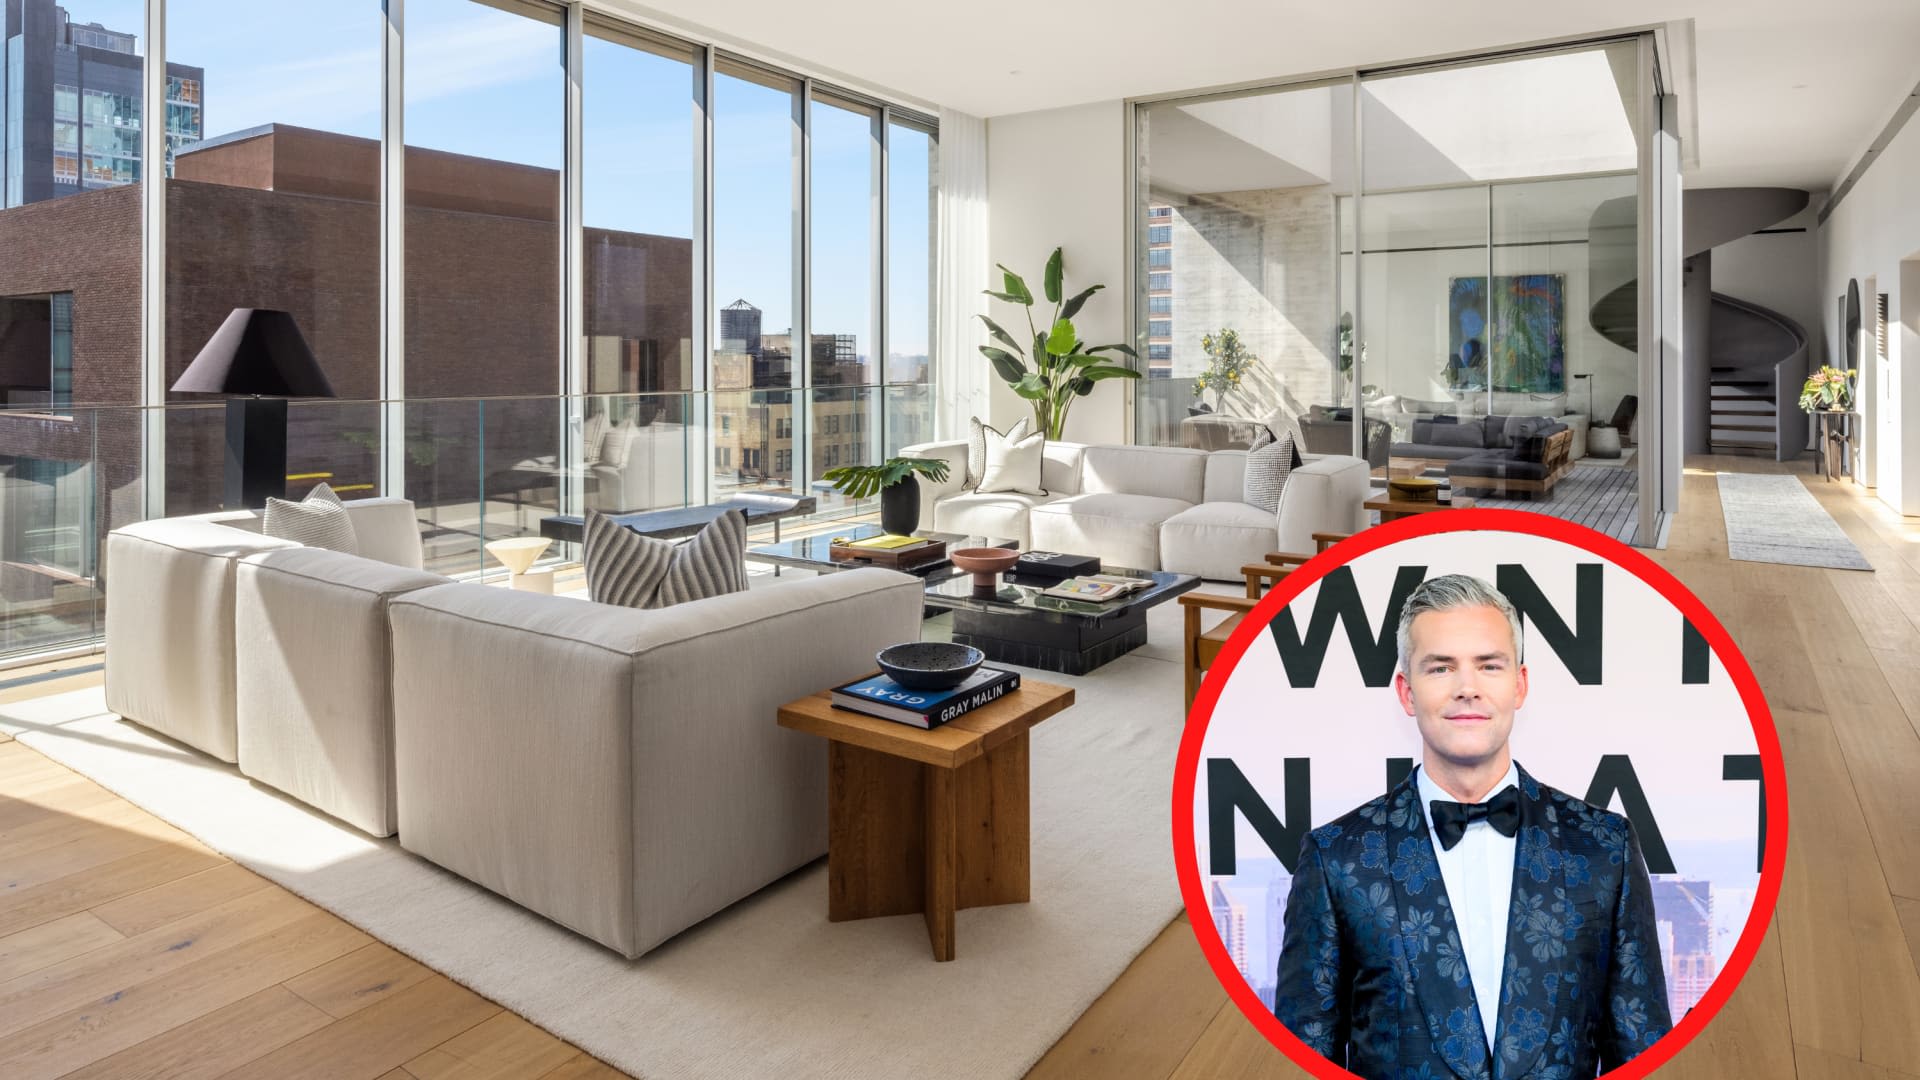 This penthouse featured on Netflix's 'Owning Manhattan' sold for $15 million—take a look inside